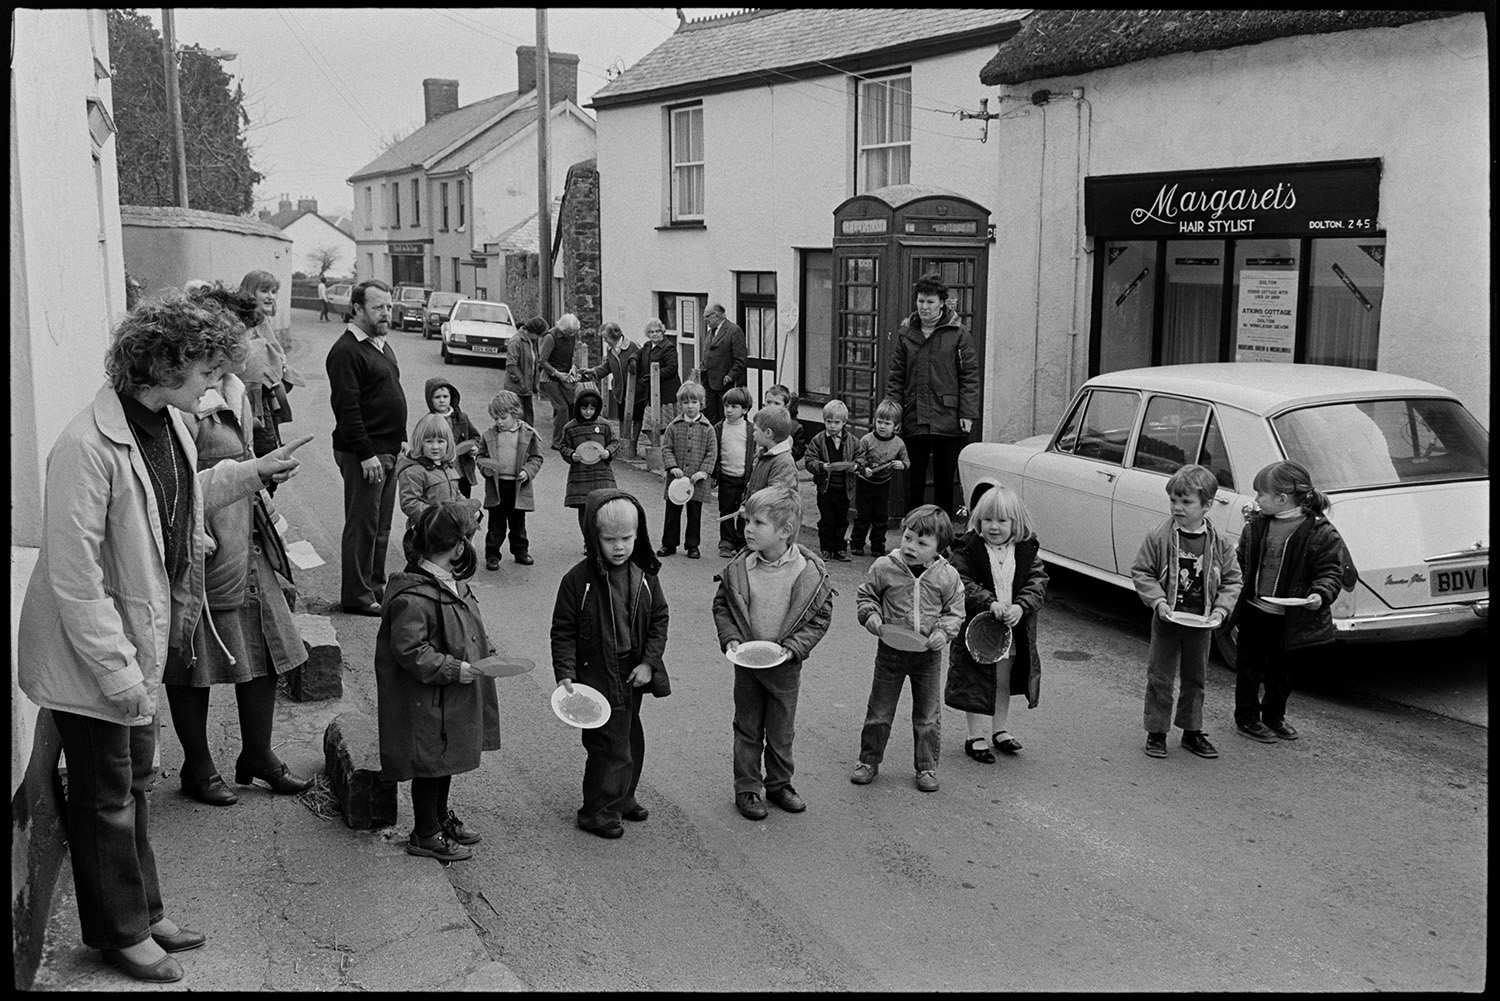 Children and parents at Pancake Race in village street.
[Children lining up outside Margaret's hair salon and telephone box in Fore Street, Dolton for a pancake race. Men and women are watching.]